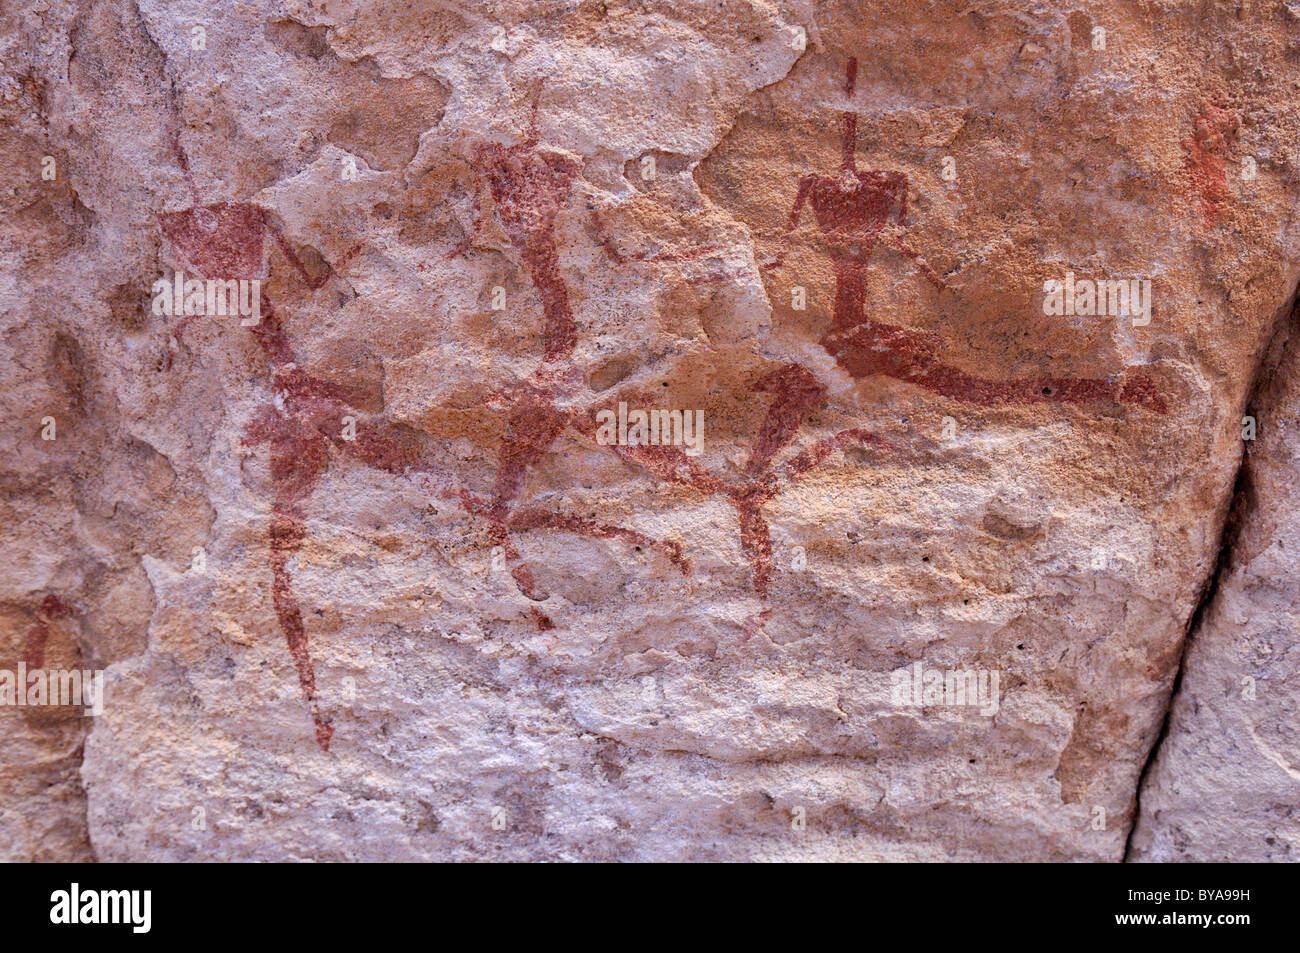 Historic painting of running or dancing people, neolithic rock art of Tassili n'Ajjer National Park, Unesco World Heritage Site Stock Photo